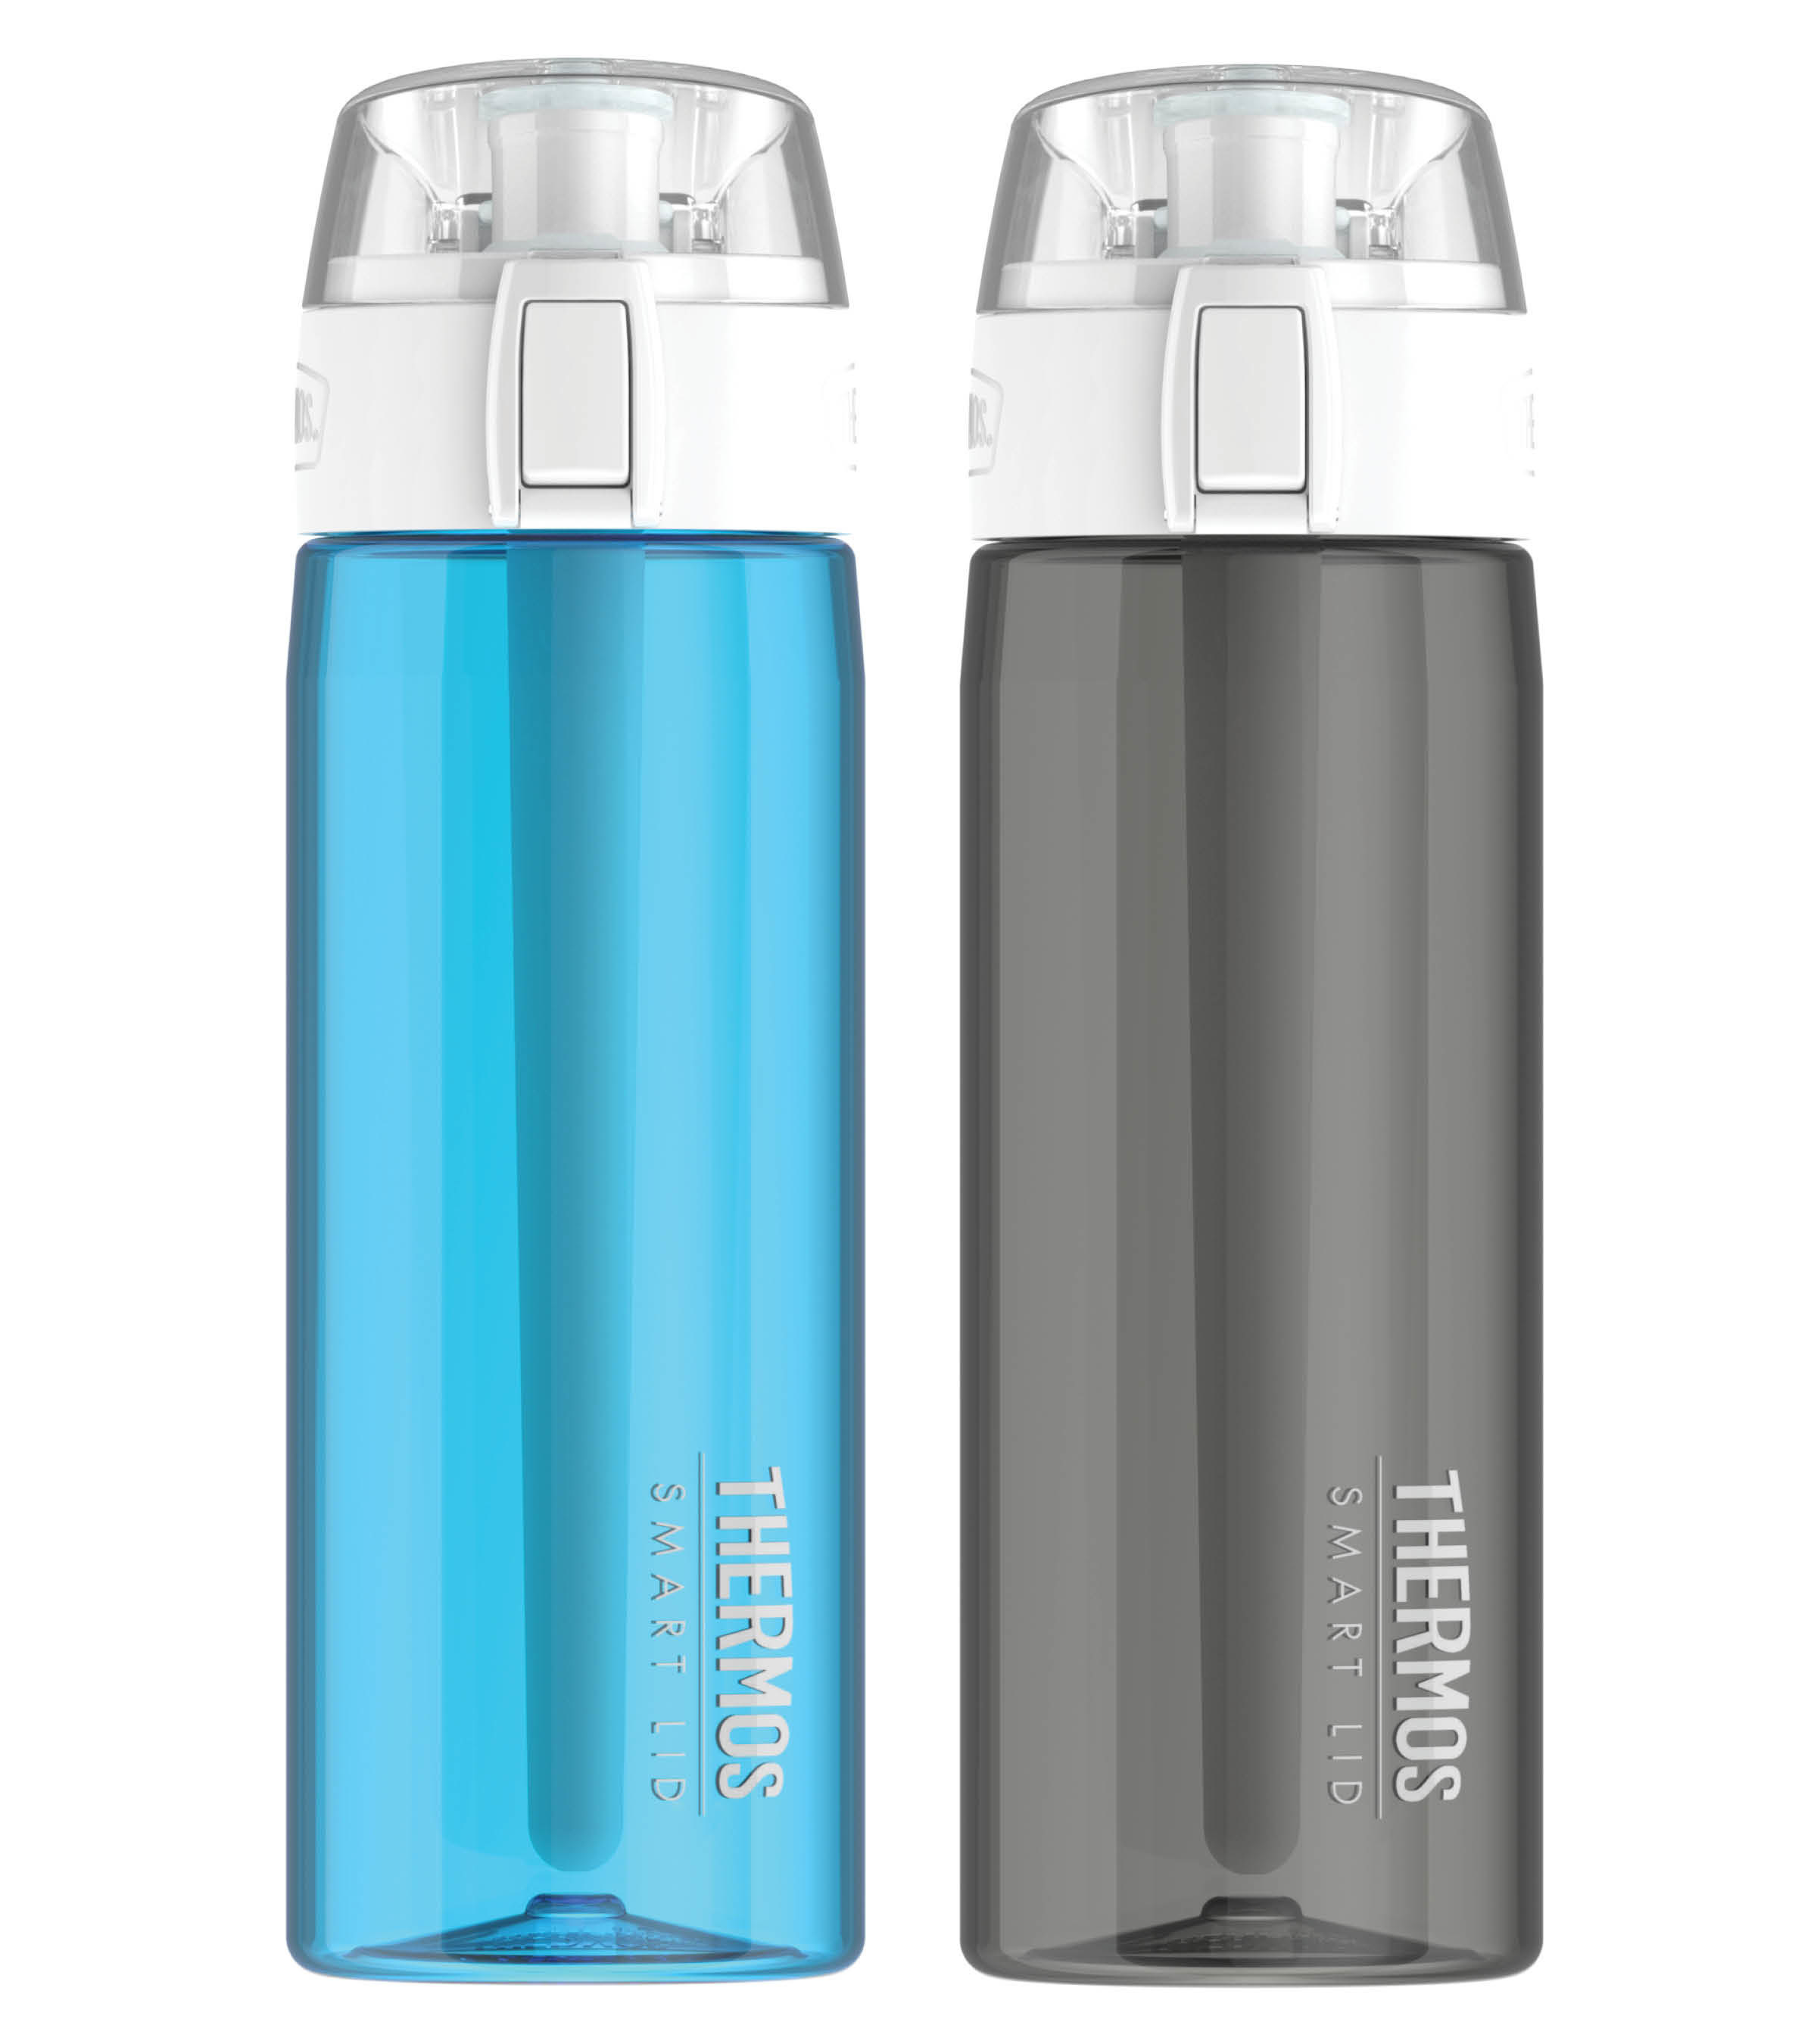 Hydration has a new hero. Genuine Thermos Brand introduces its smartest product innovation yet − the Thermos Connected Hydration Bottle with Smart Lid. Available in November, the Connected Bottle allows consumers to customize and monitor their hydration goals through the Thermos Smart Lid app and stay hydrated, no matter what life throws at them.